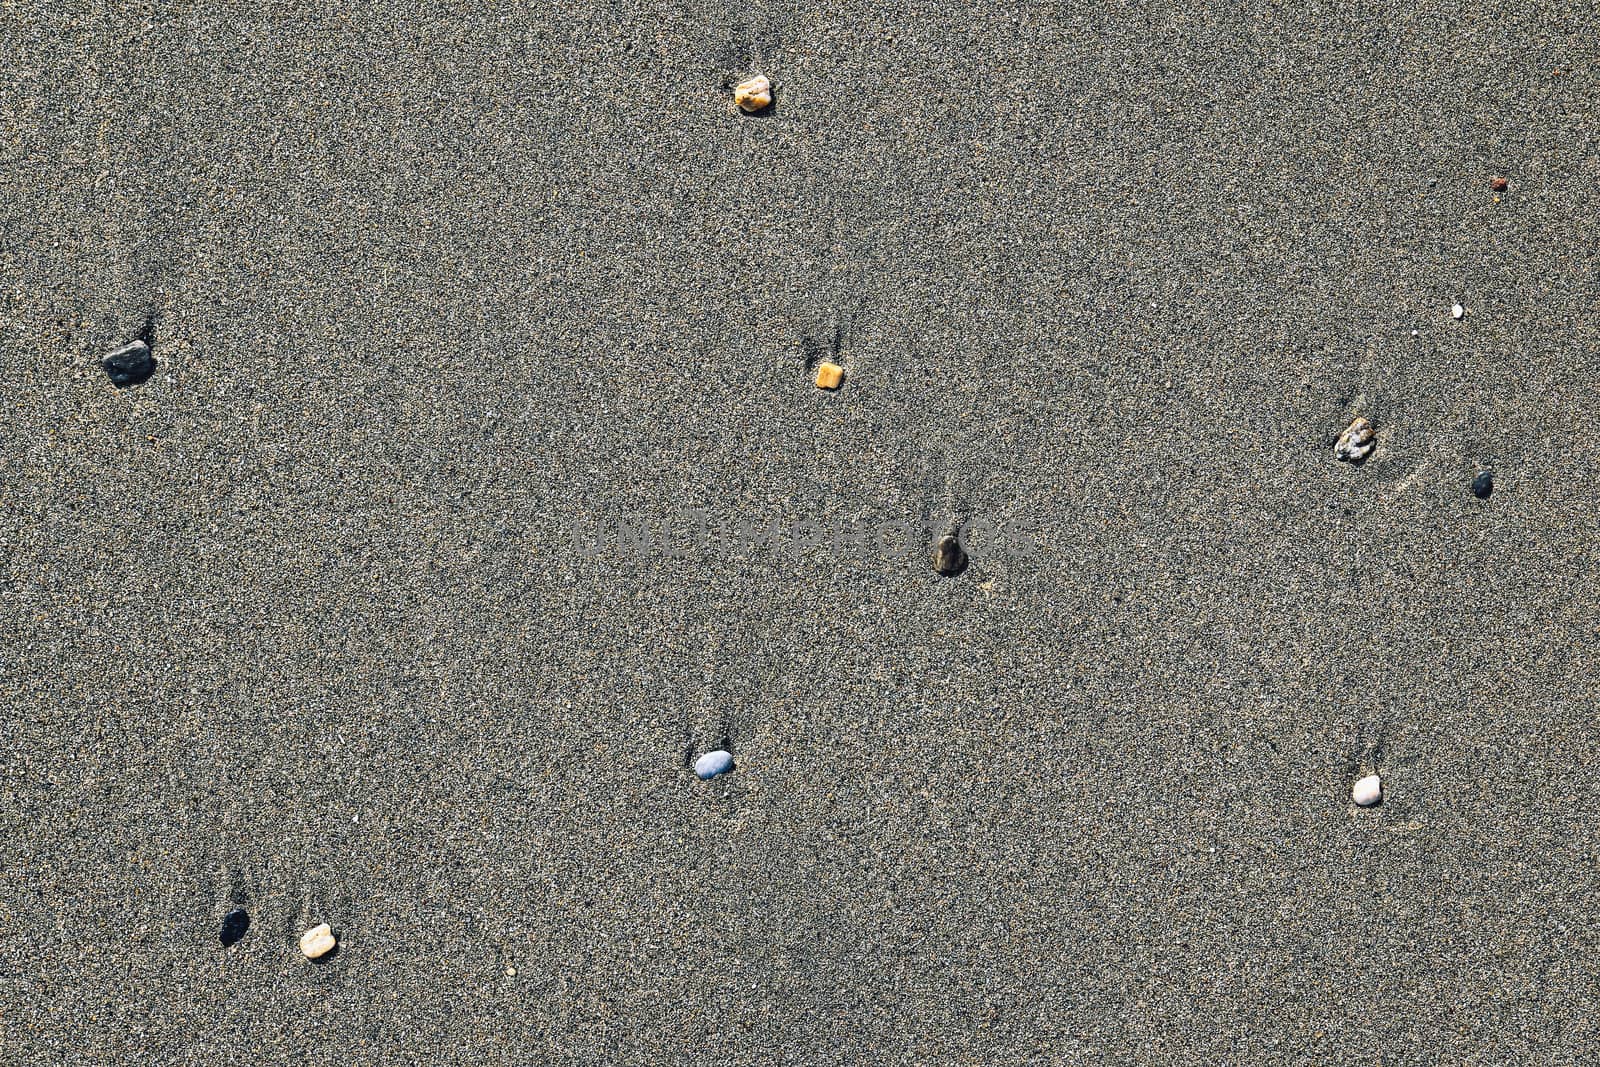 Rare pebble background. Different stones with stains on the wet sand. Beach beauty backdrop.